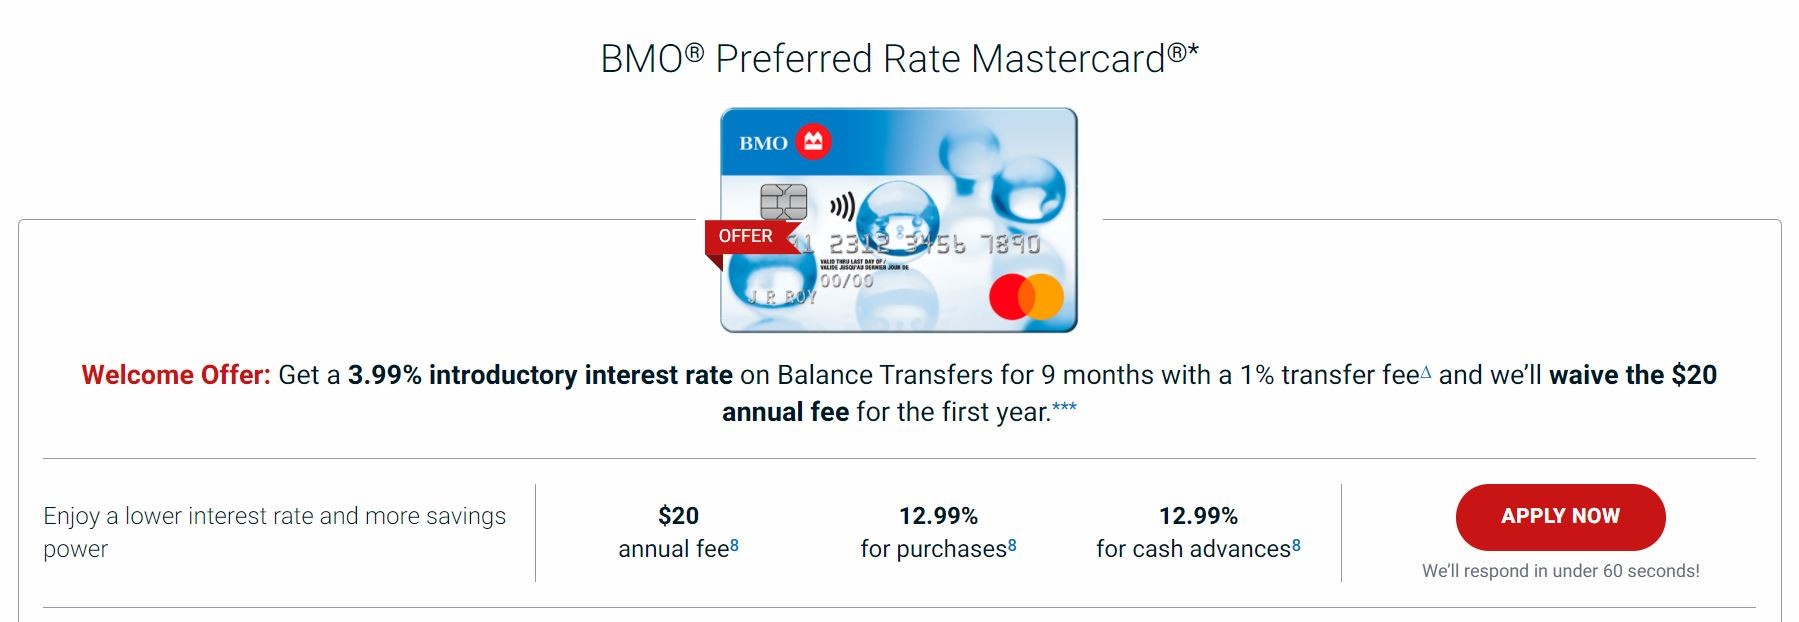 Bank of Montreal Credit Card - Find Out How to Apply